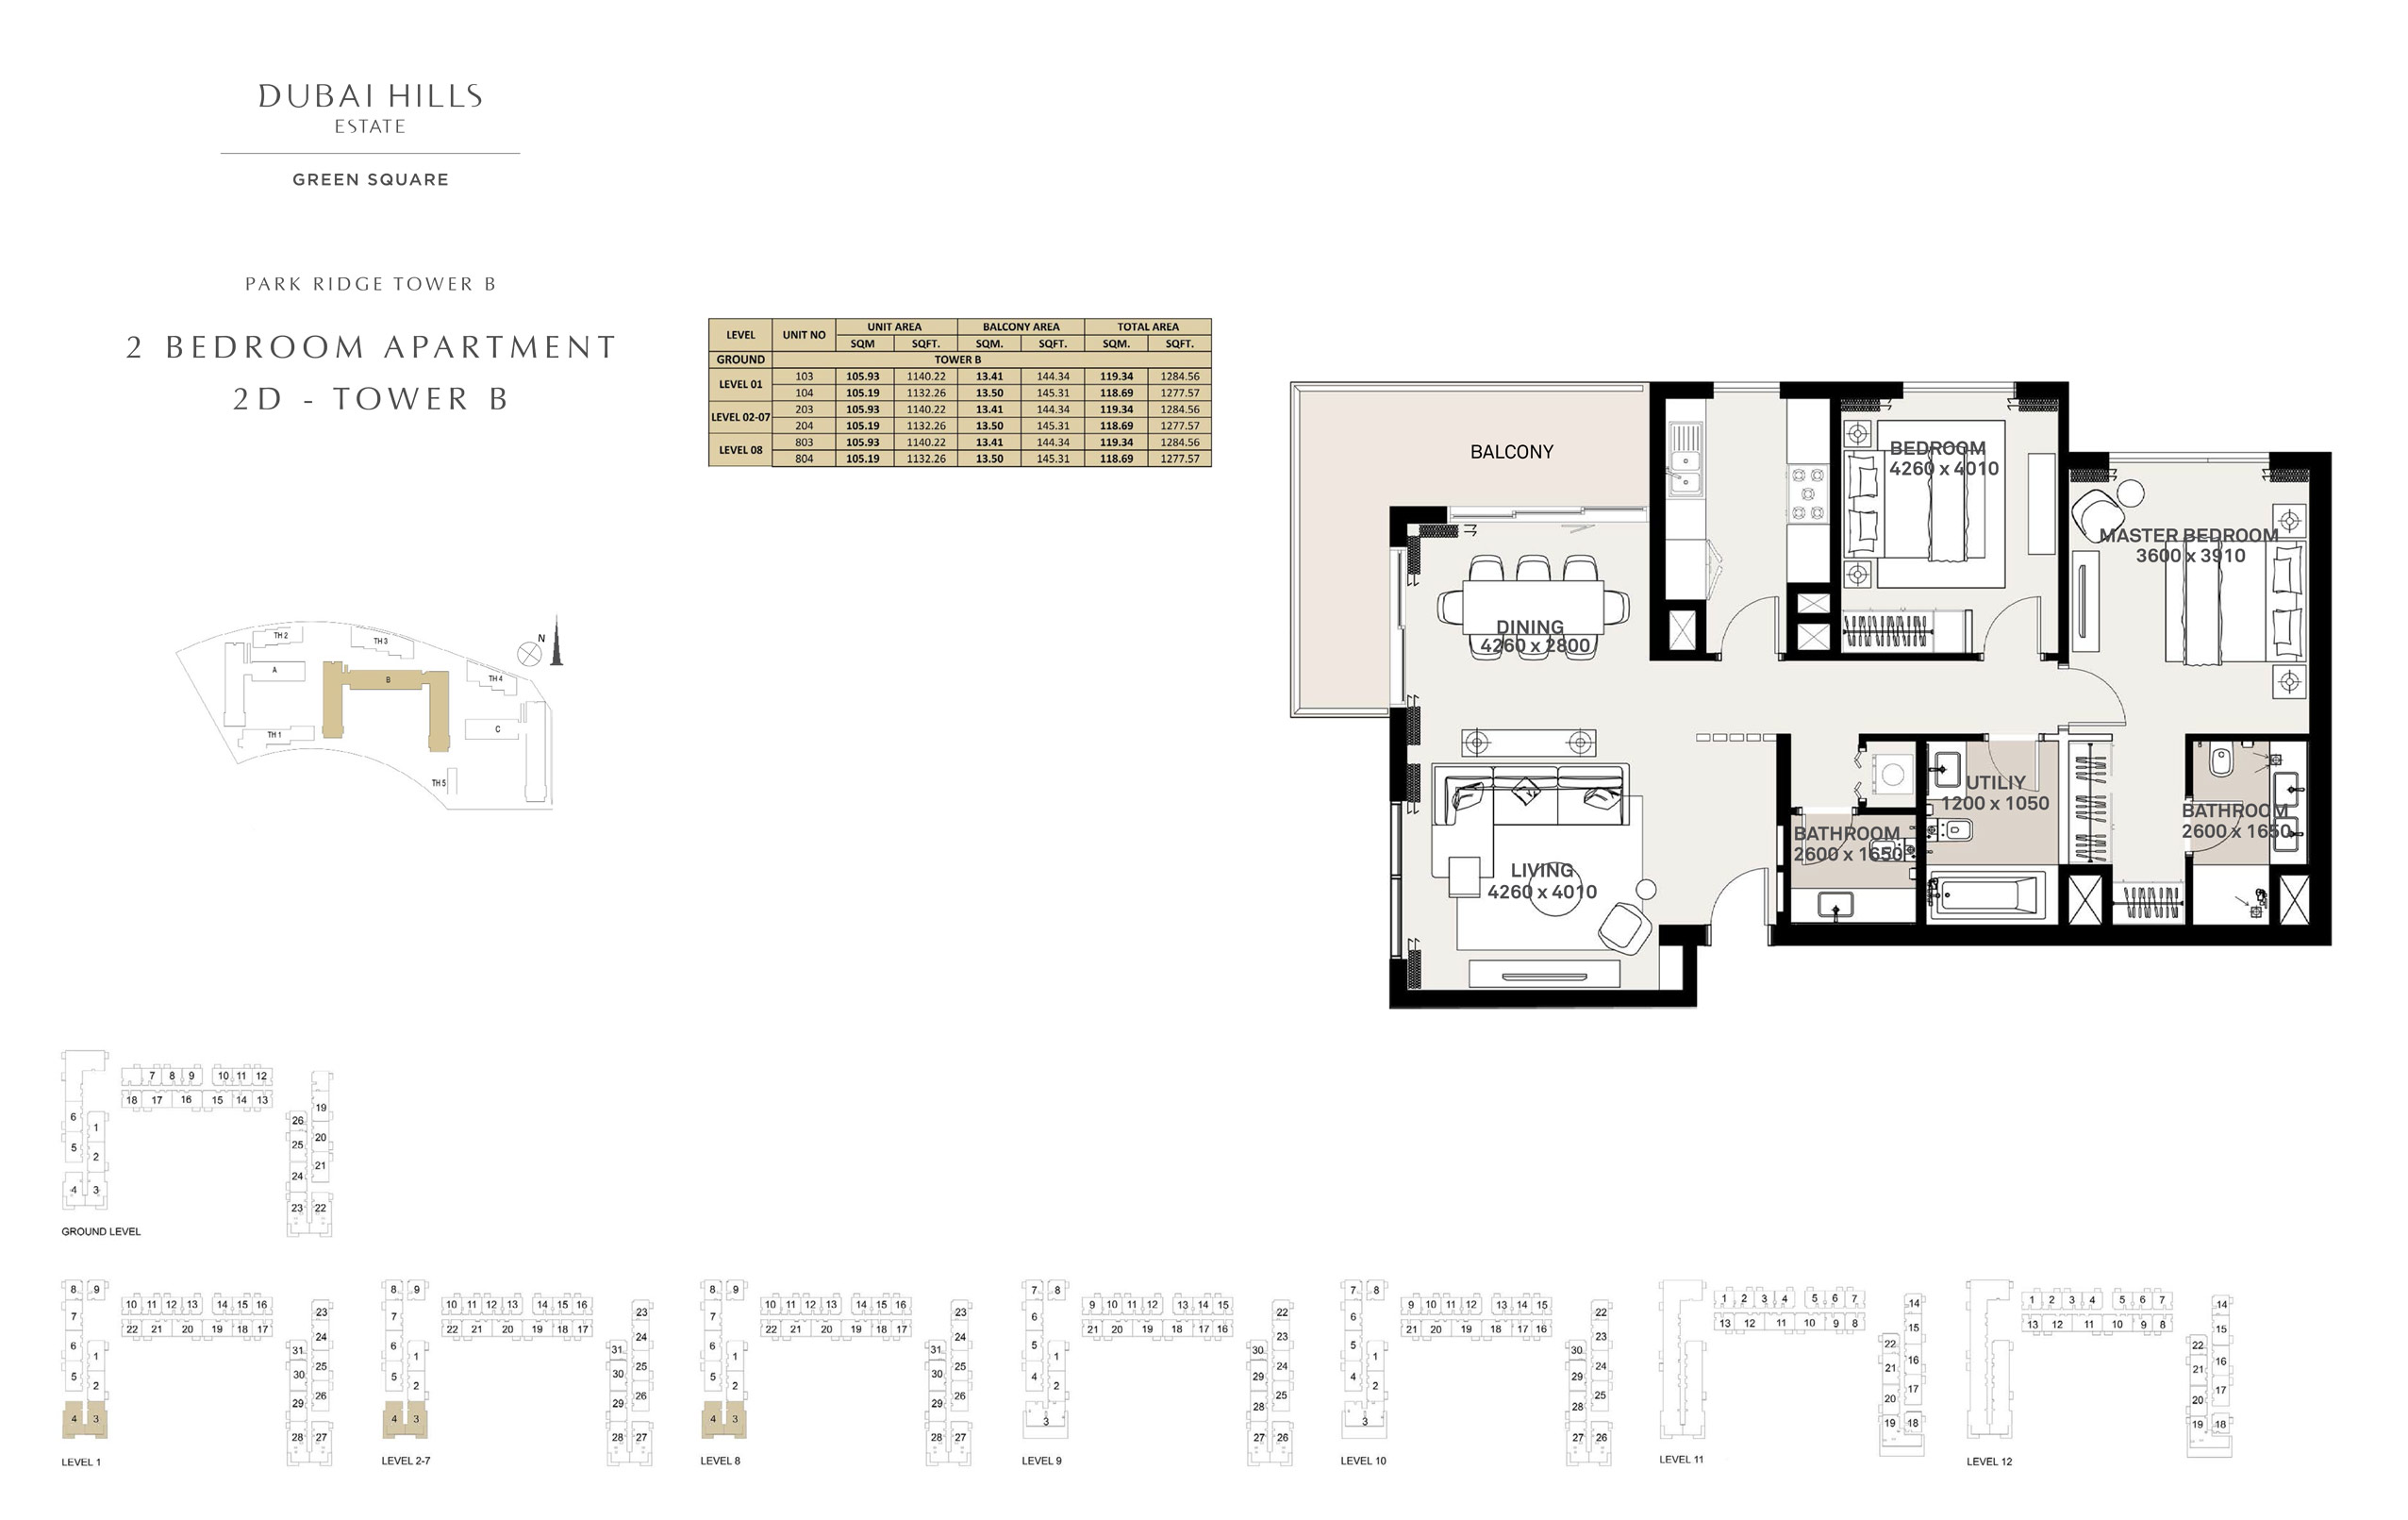 2 Bedroom Apartment 2 D - Tower B, Size 1277 sq ft